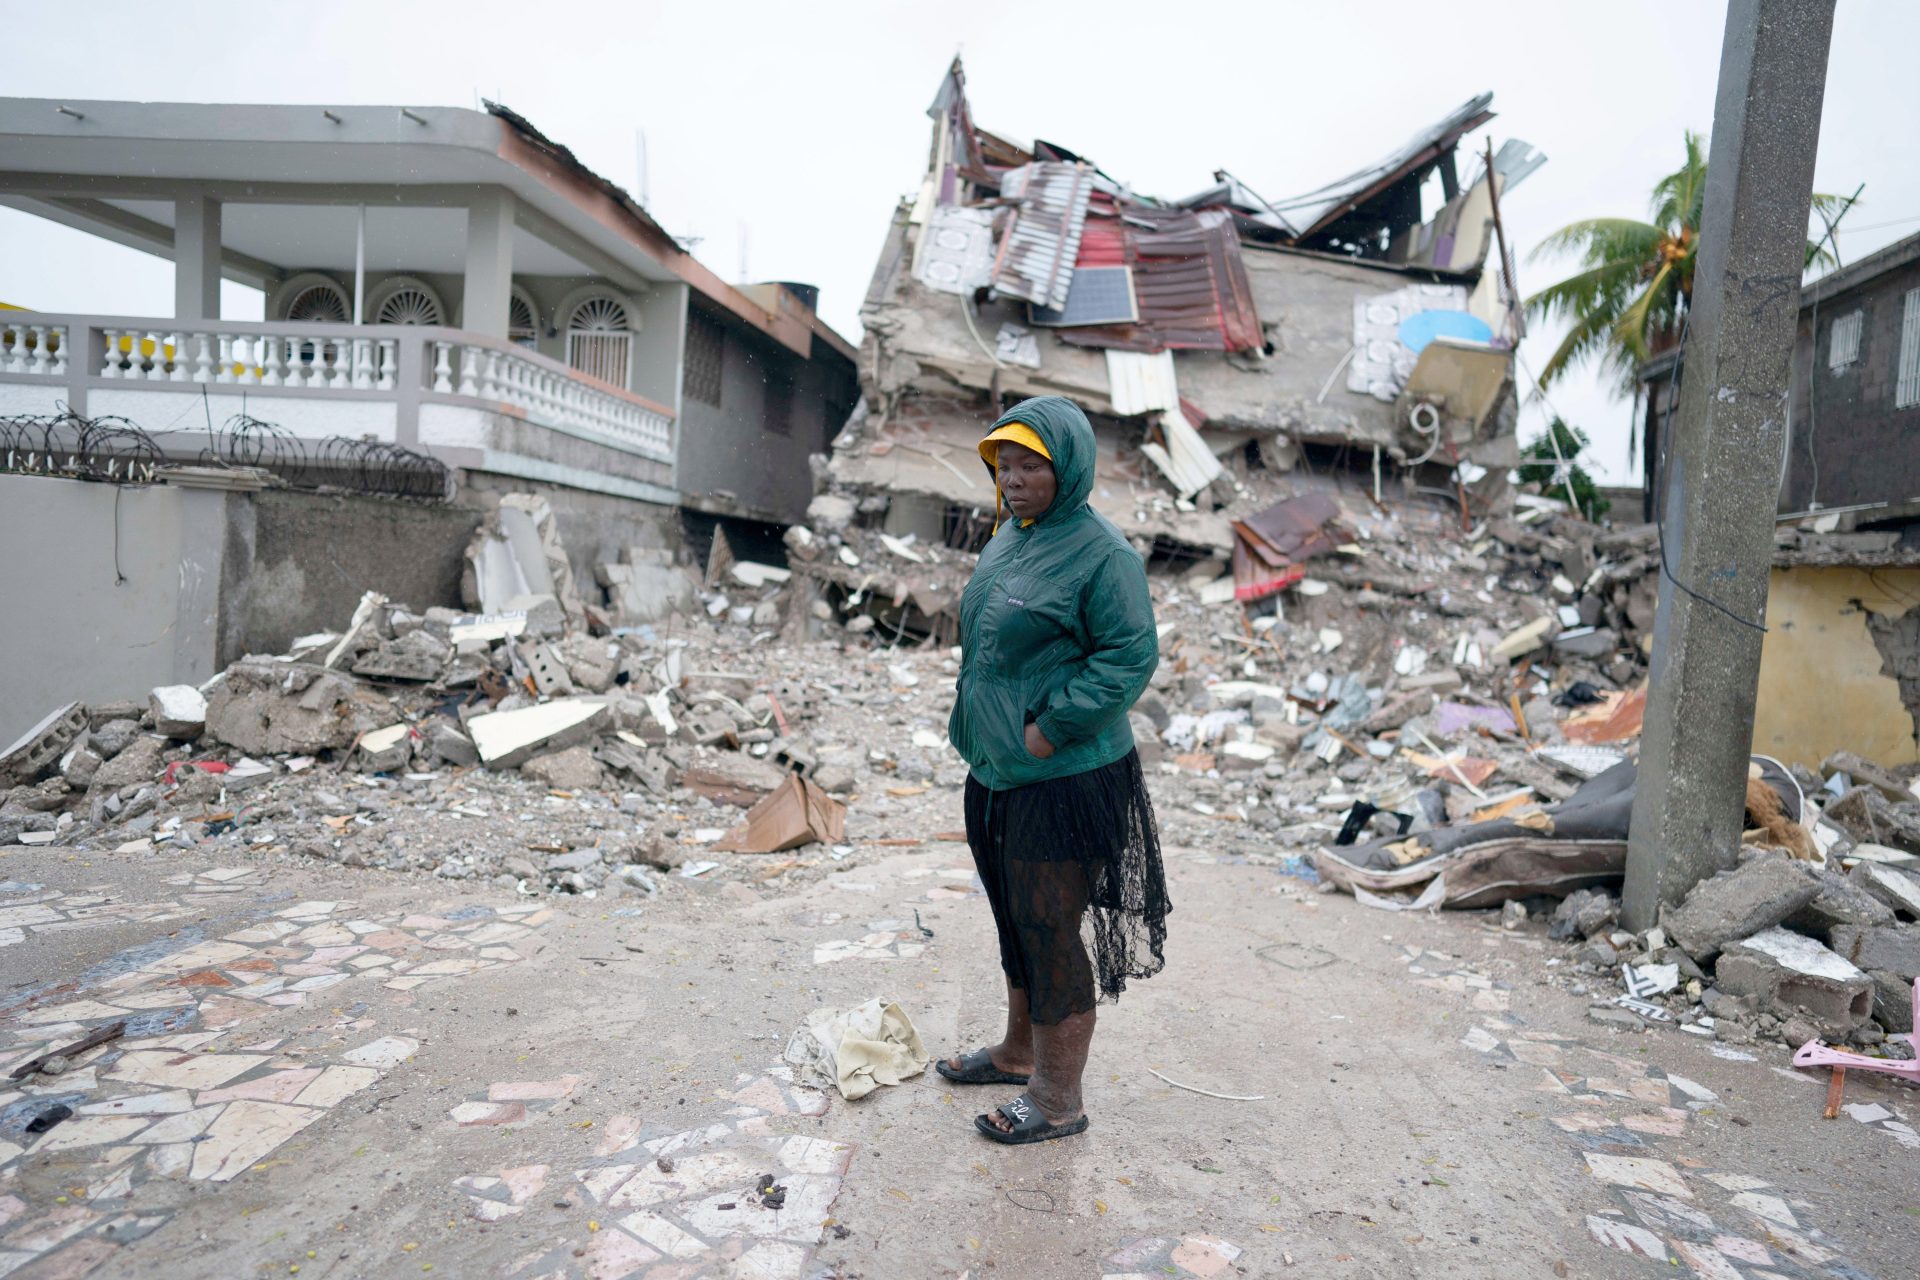 Home Seismometers Provide Well-known Knowledge on Haiti’s Quake